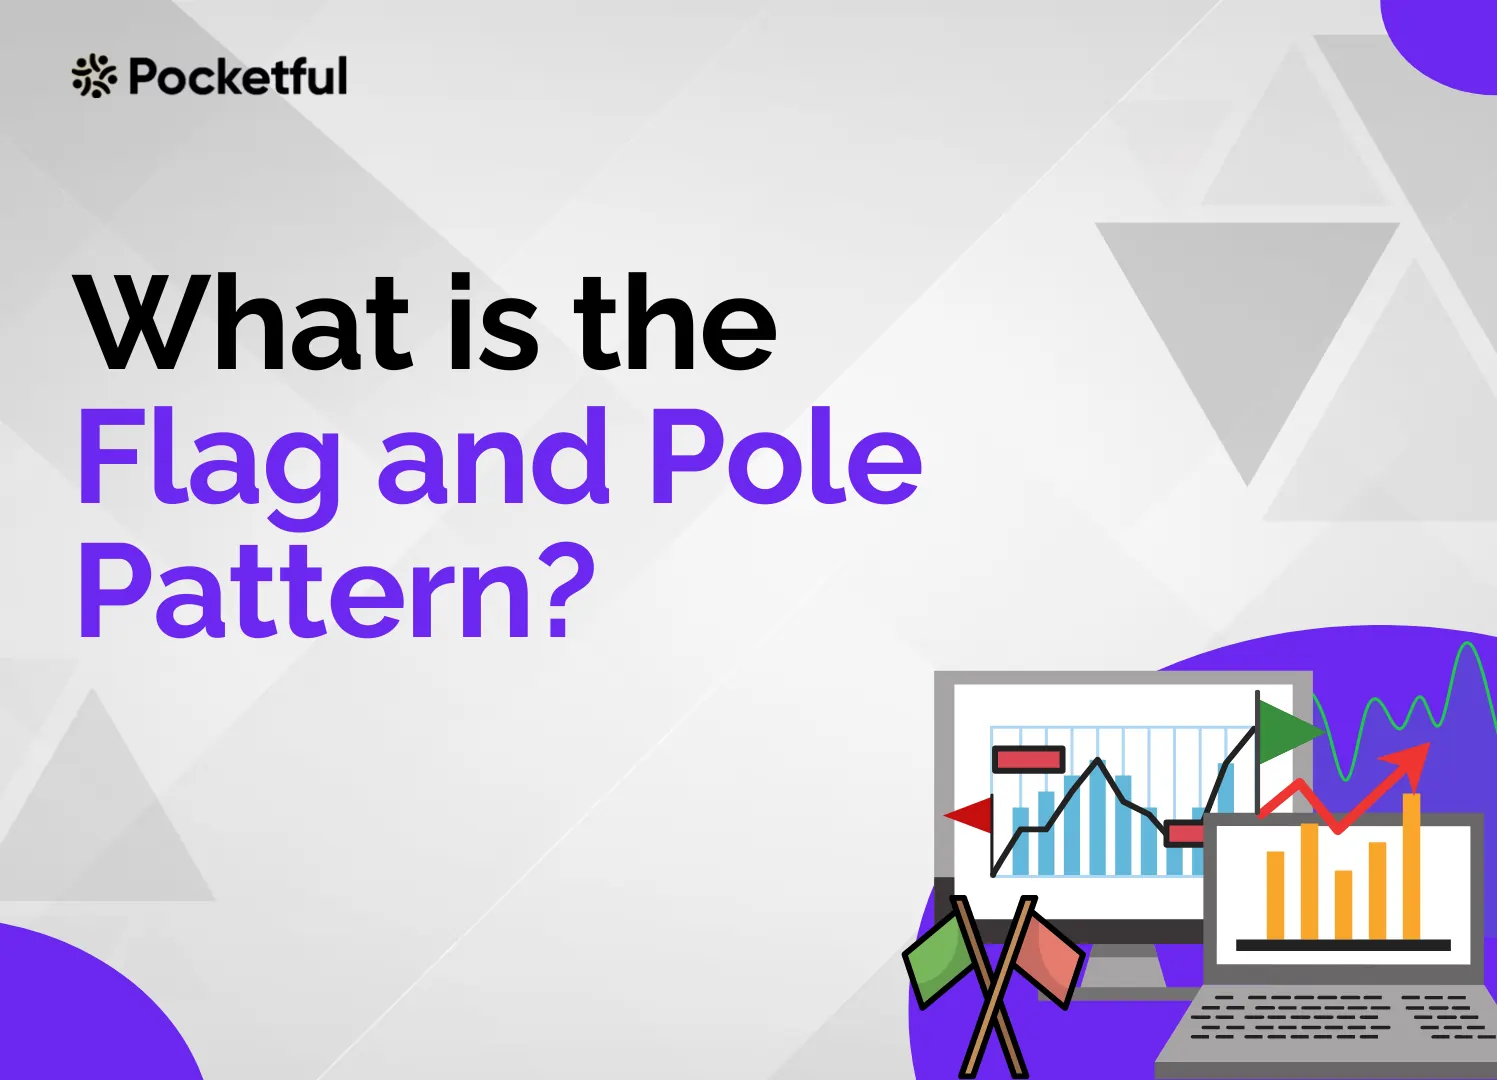 What is the Flag and Pole Pattern?